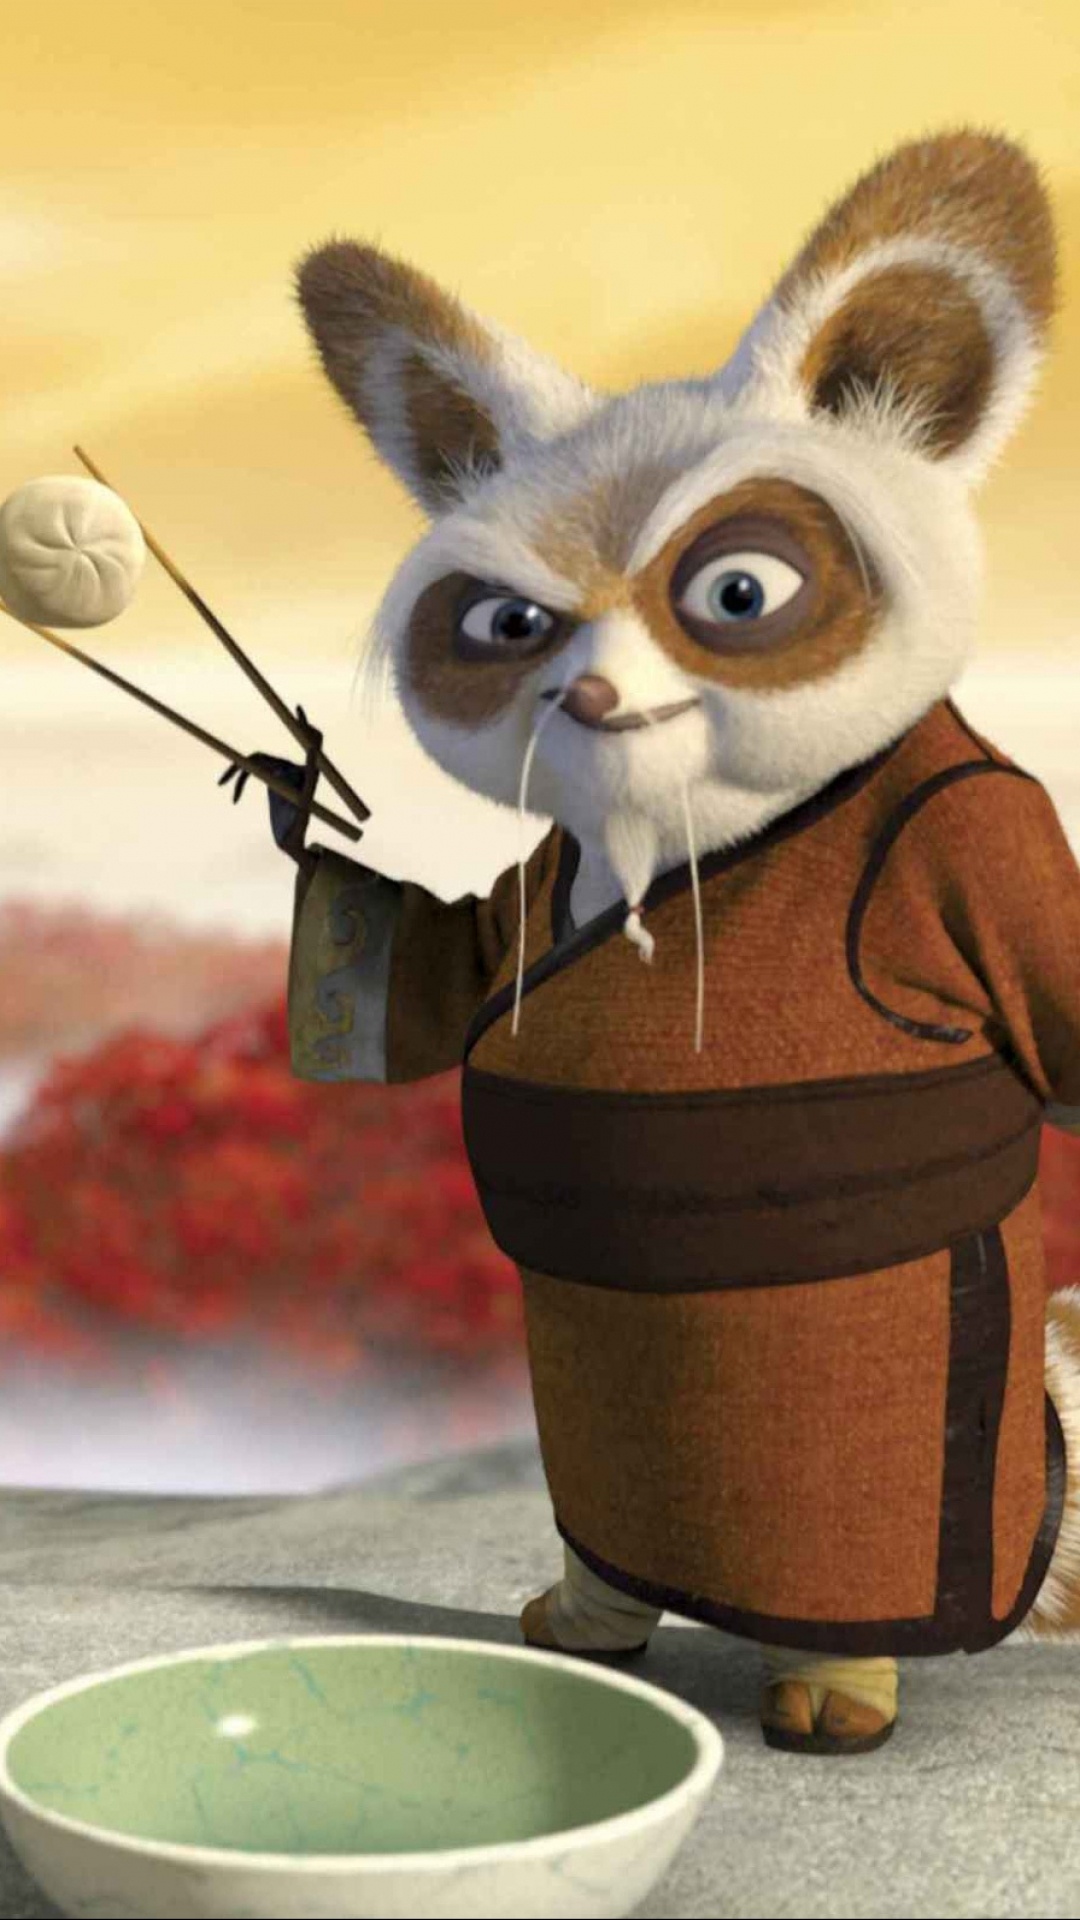 Master Shifu: Retired from active teaching in order to focus on learning how to use chi. 1080x1920 Full HD Wallpaper.